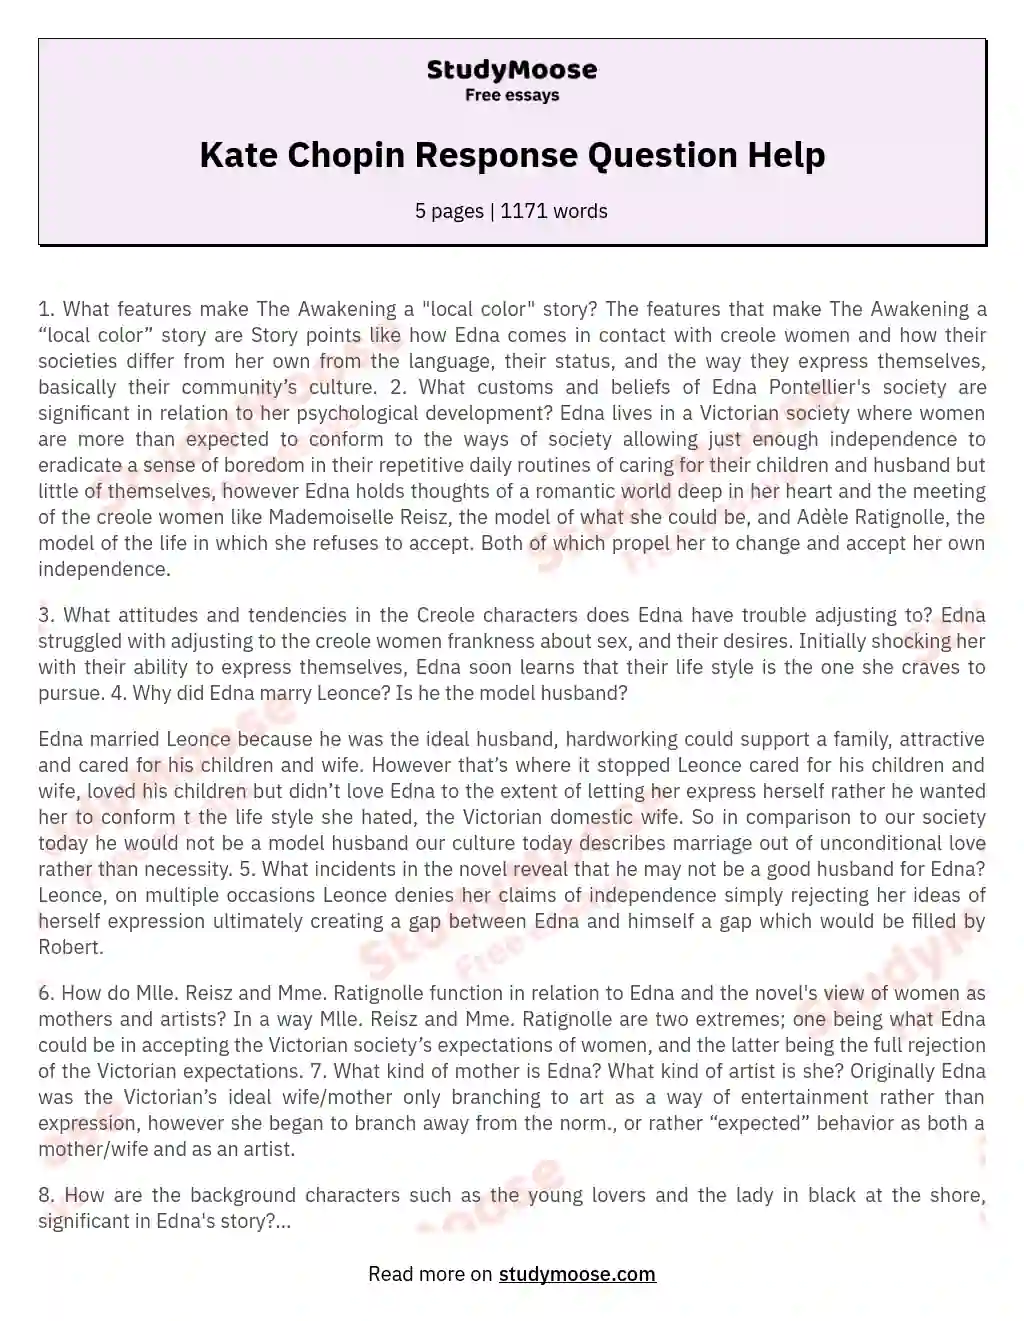 Kate Chopin Response Question Help essay